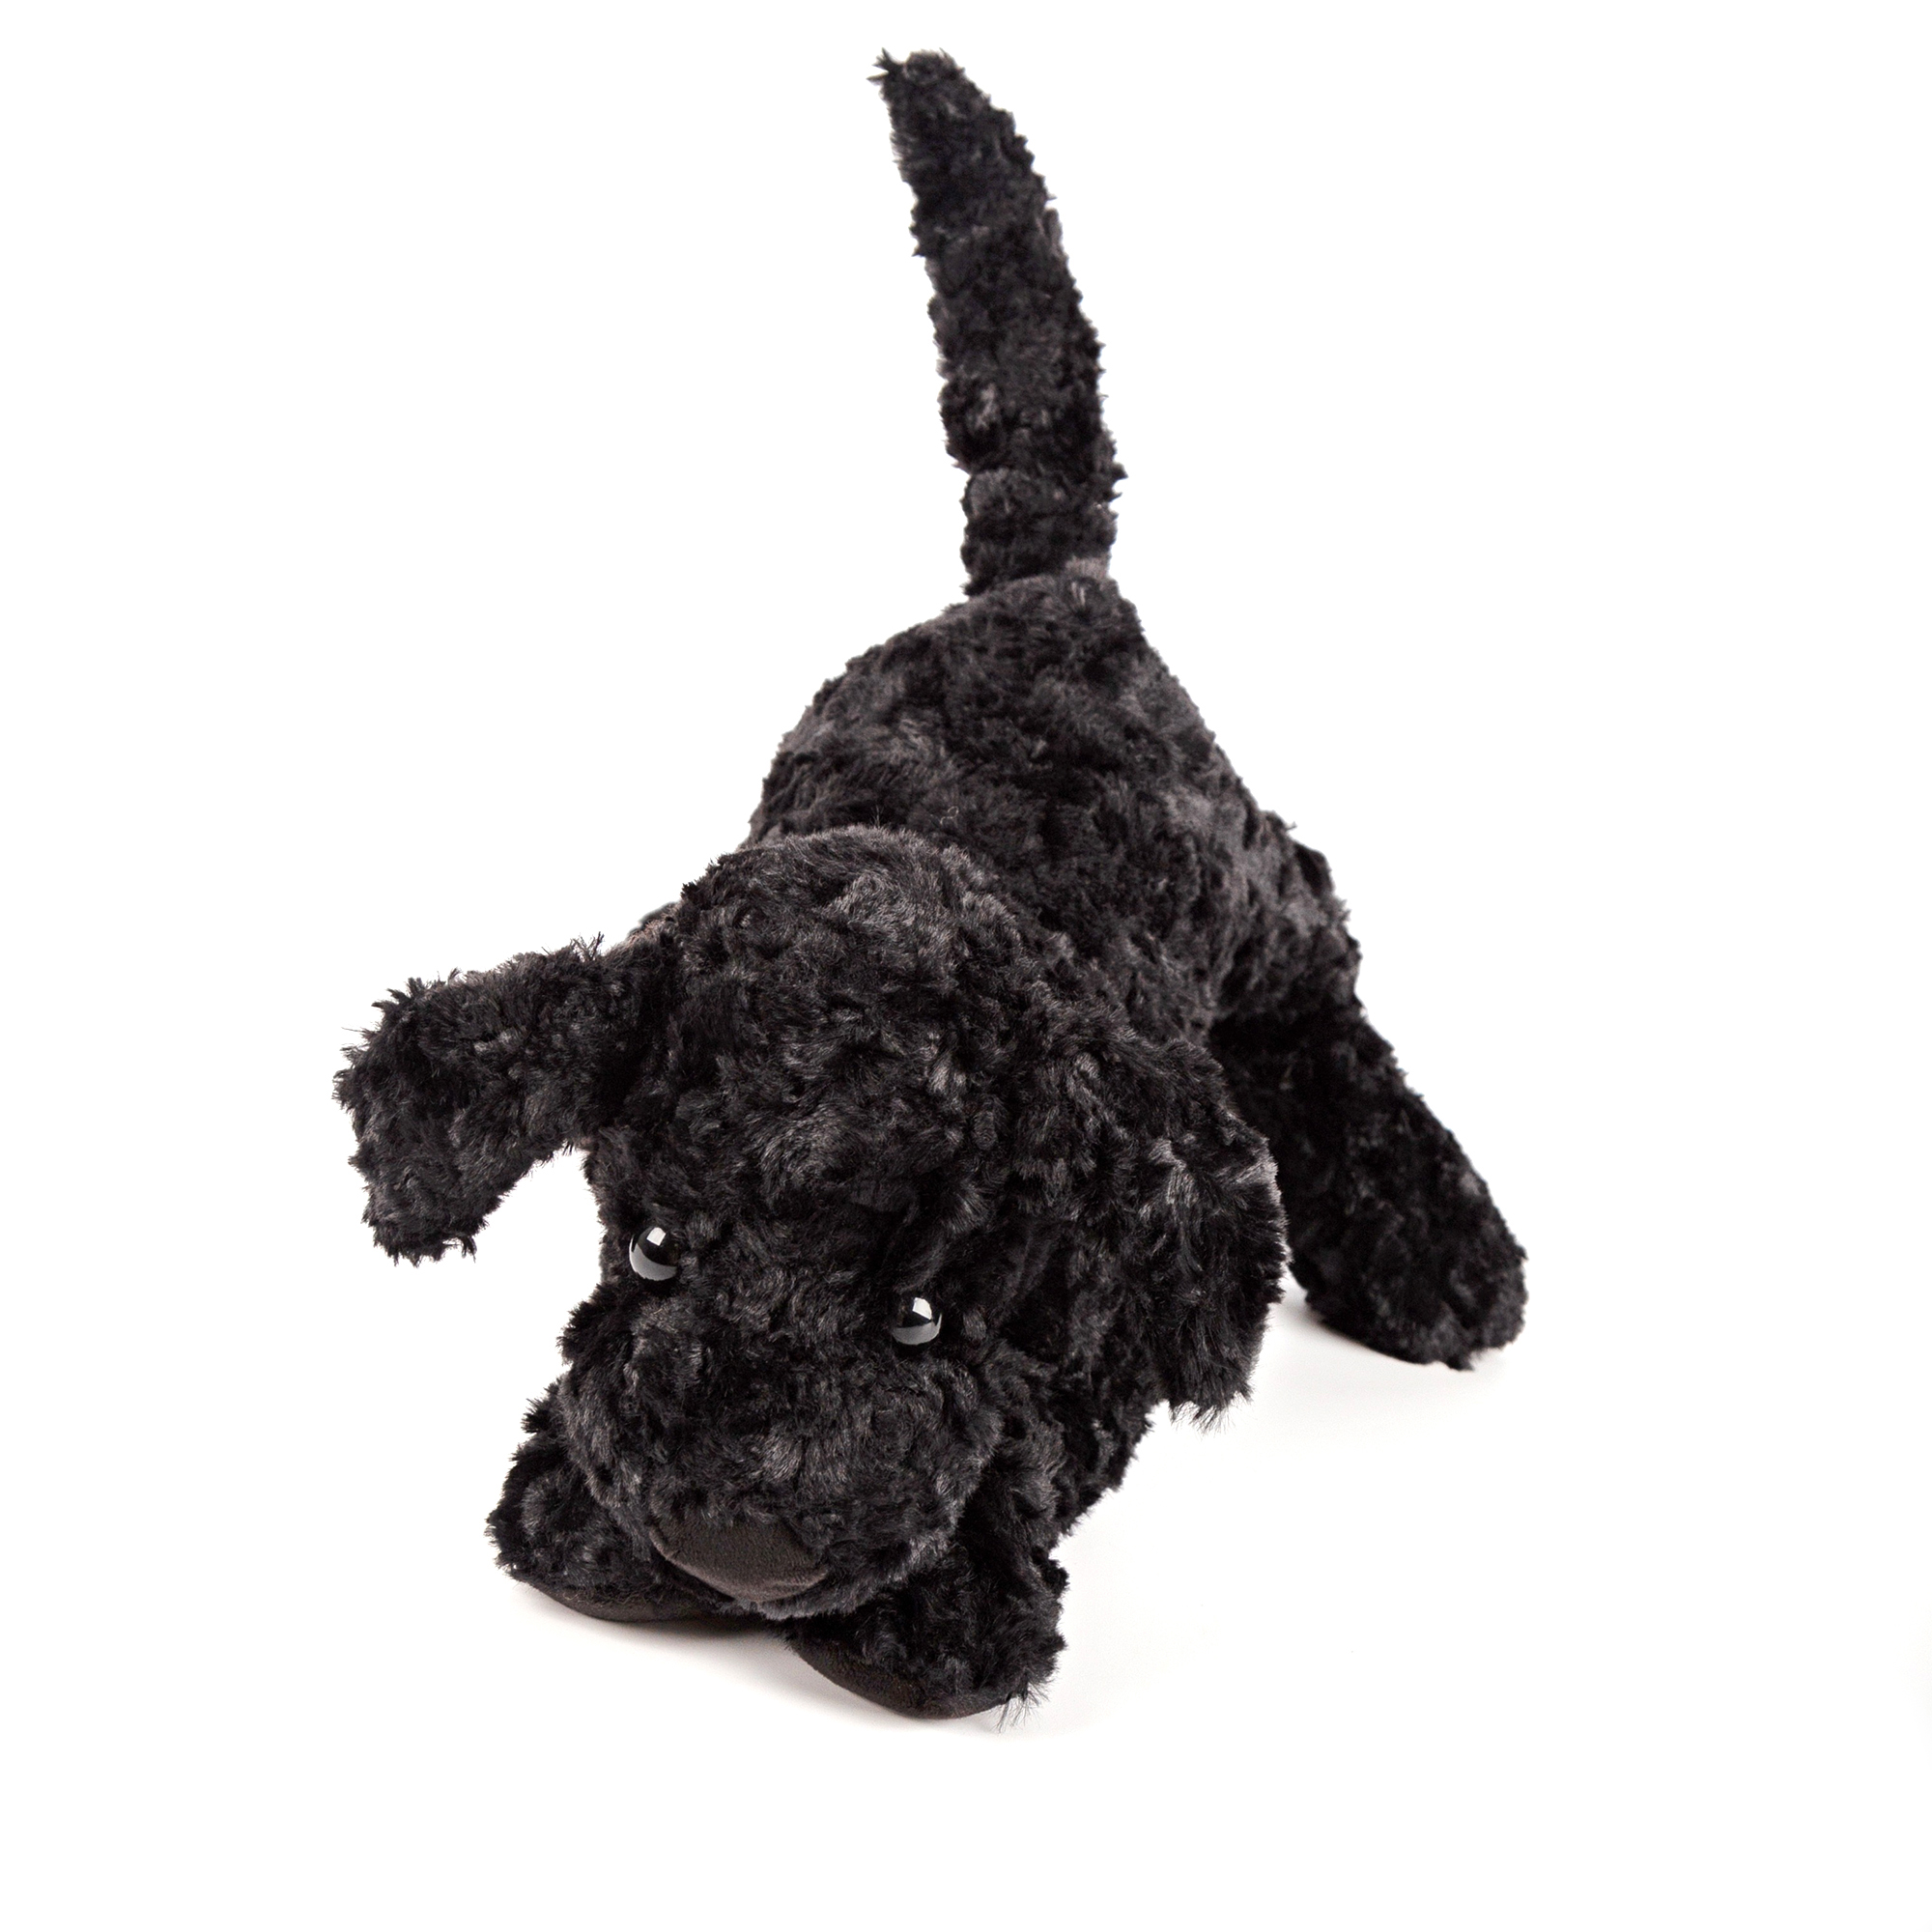 Plush toy dog Richard Wagner's puppy, Beasts collection